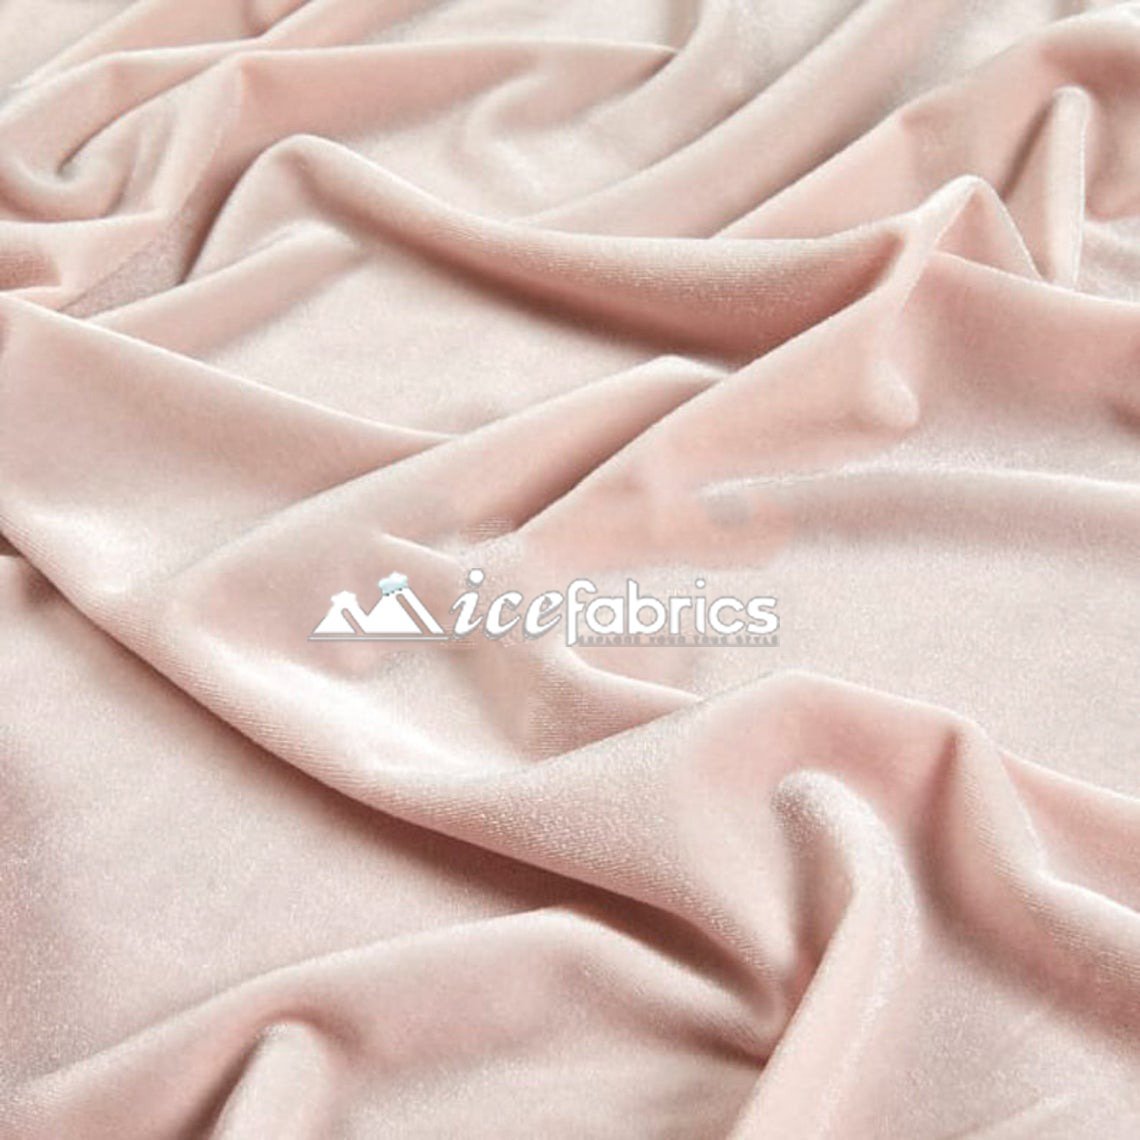 Hight Quality Stretch Velvet Fabric By The Roll (20 yards) Wholesale FabricVelvet FabricICE FABRICSICE FABRICSNudeBy The Roll (60" Wide)Hight Quality Stretch Velvet Fabric By The Roll (20 yards) Wholesale Fabric ICE FABRICS Nude